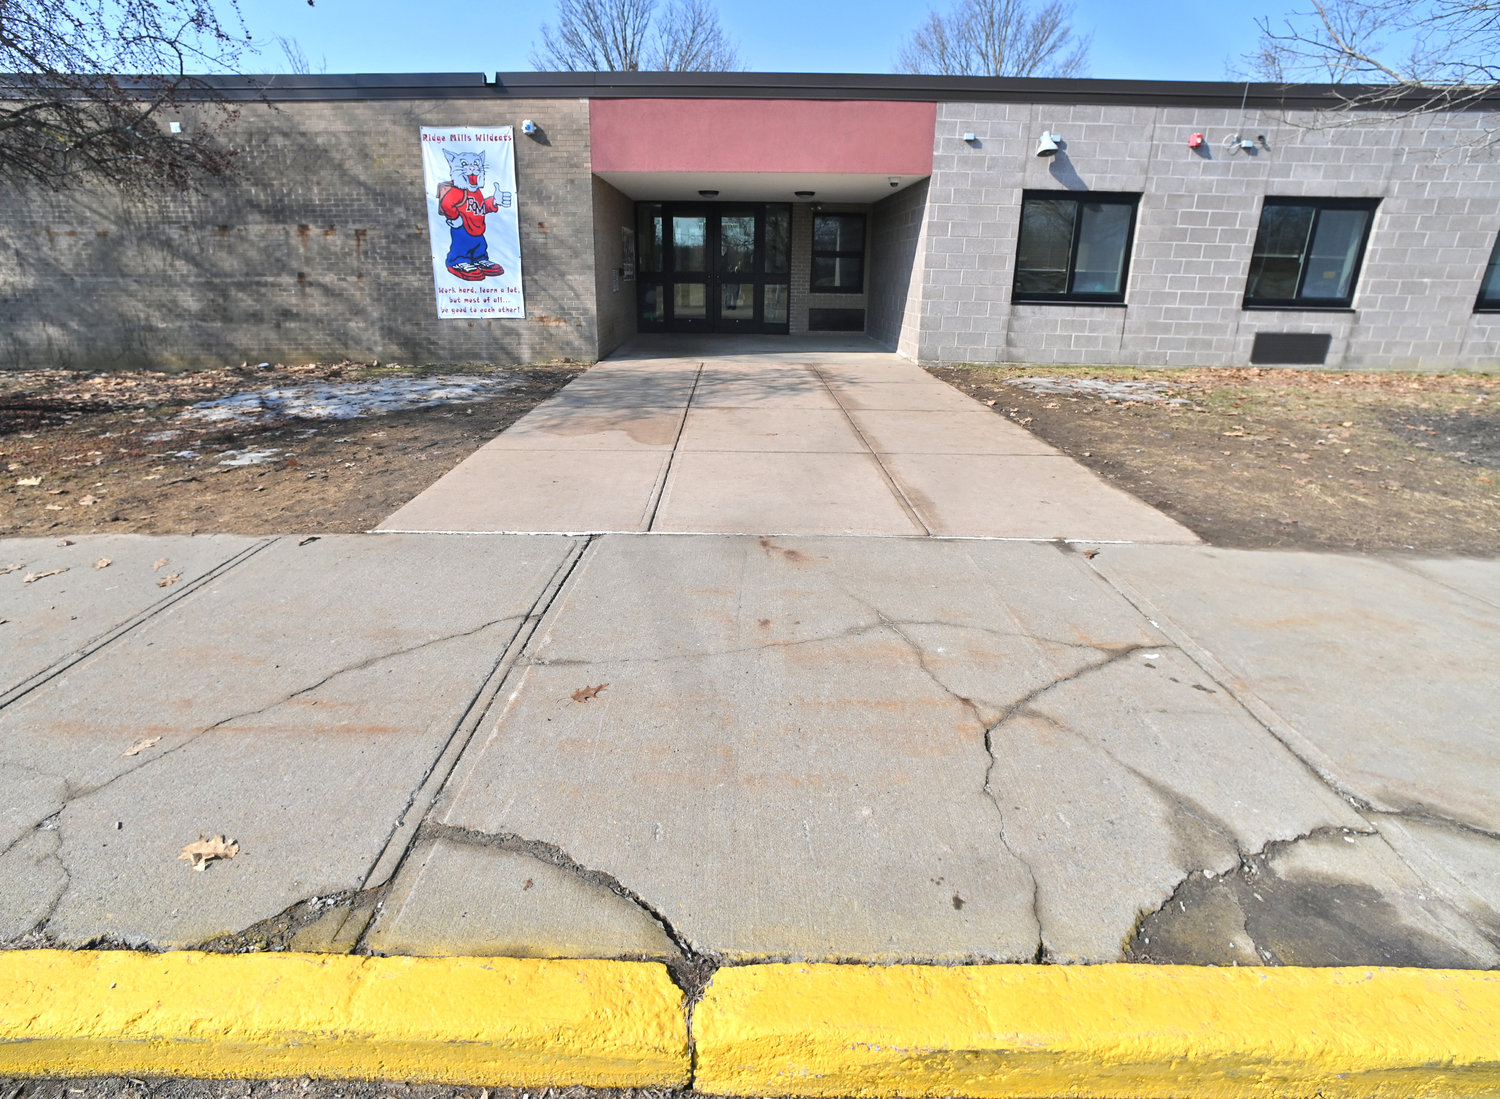 NEW VESTIBULE PROPOSED — The entryway to the Ridge Mills Elementary School, 7841 Ridge Mills Road, is shown on Friday. The Rome City School District has proposed a $949,627 project at the school, which includes the construction of a more secure vestibule.